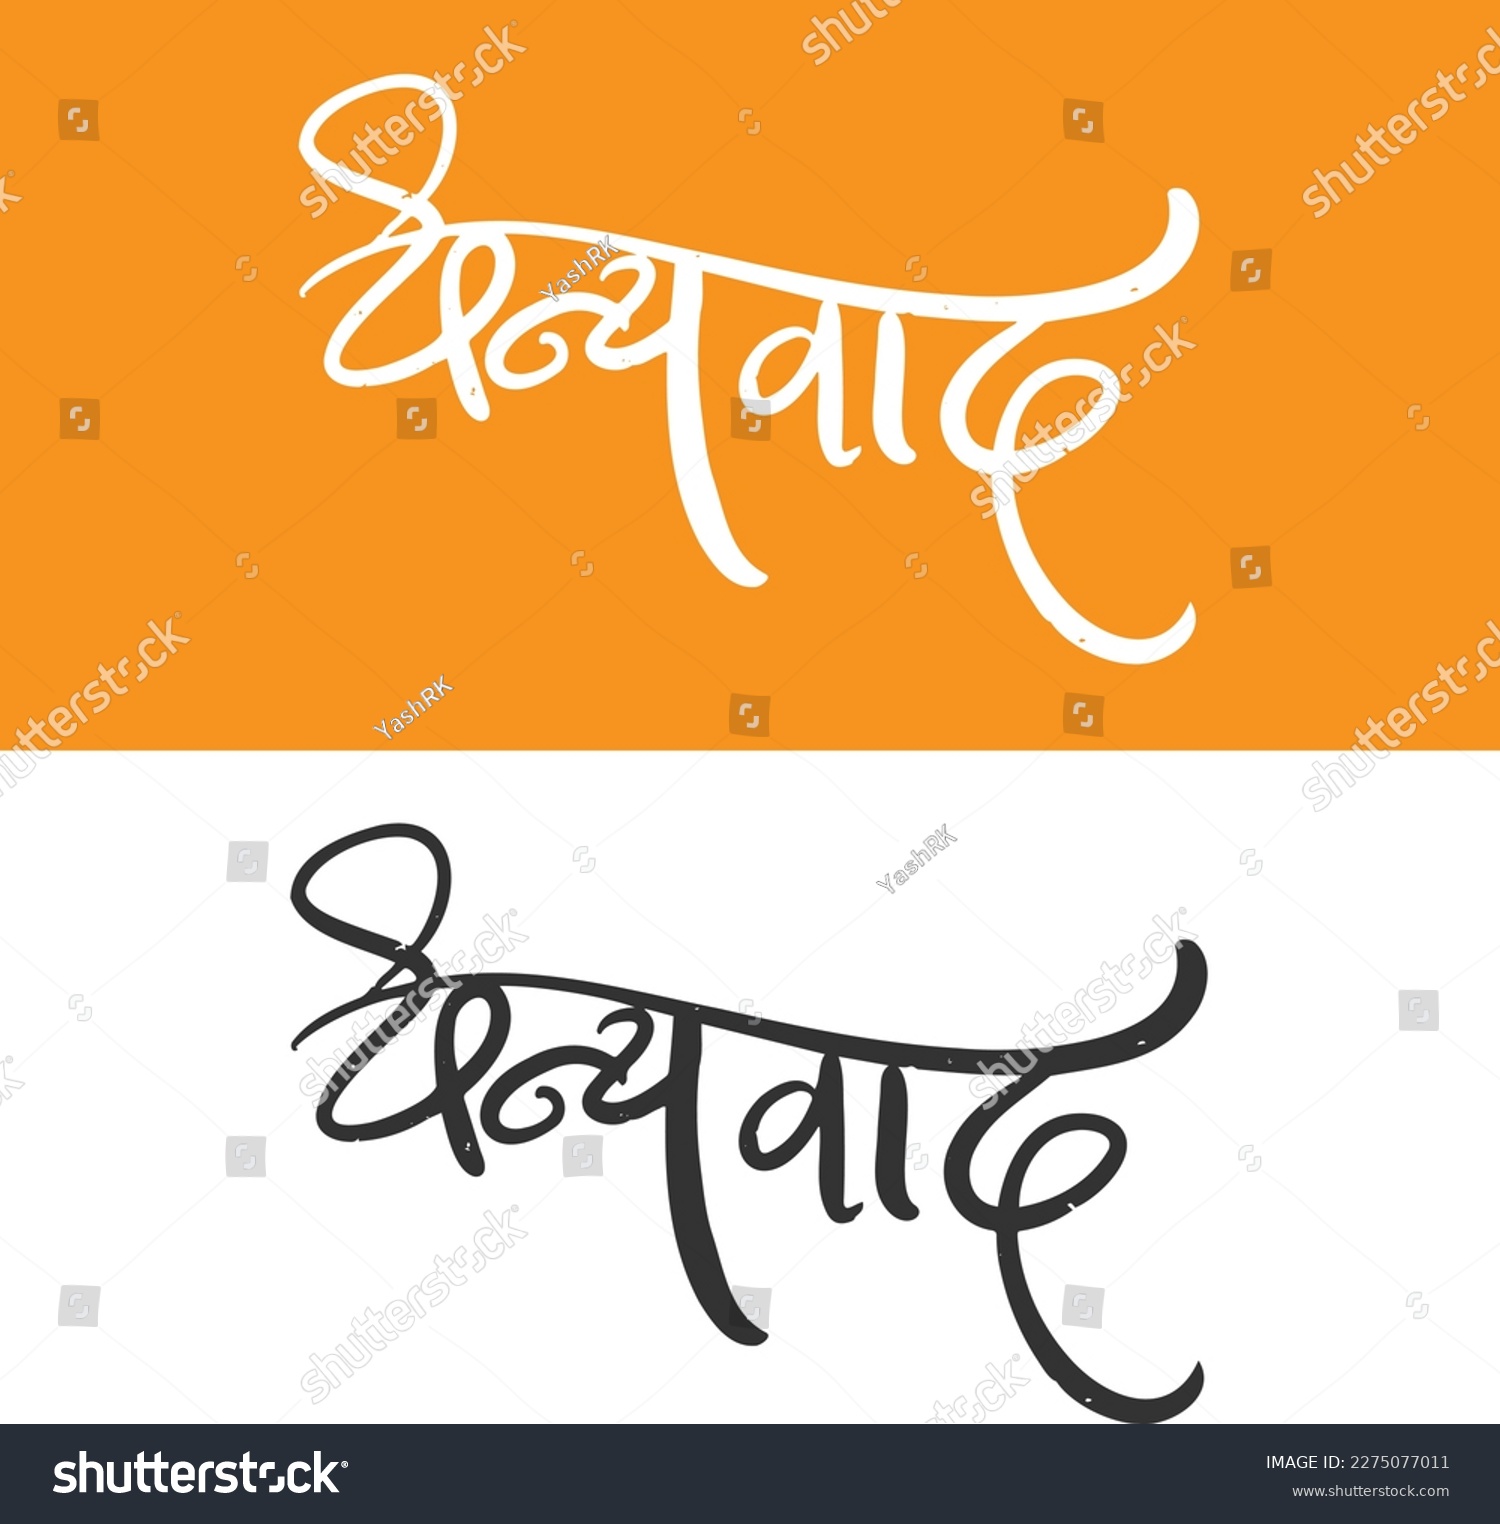 SVG of Dhanyawad or Thank you calligraphy in Marathi svg